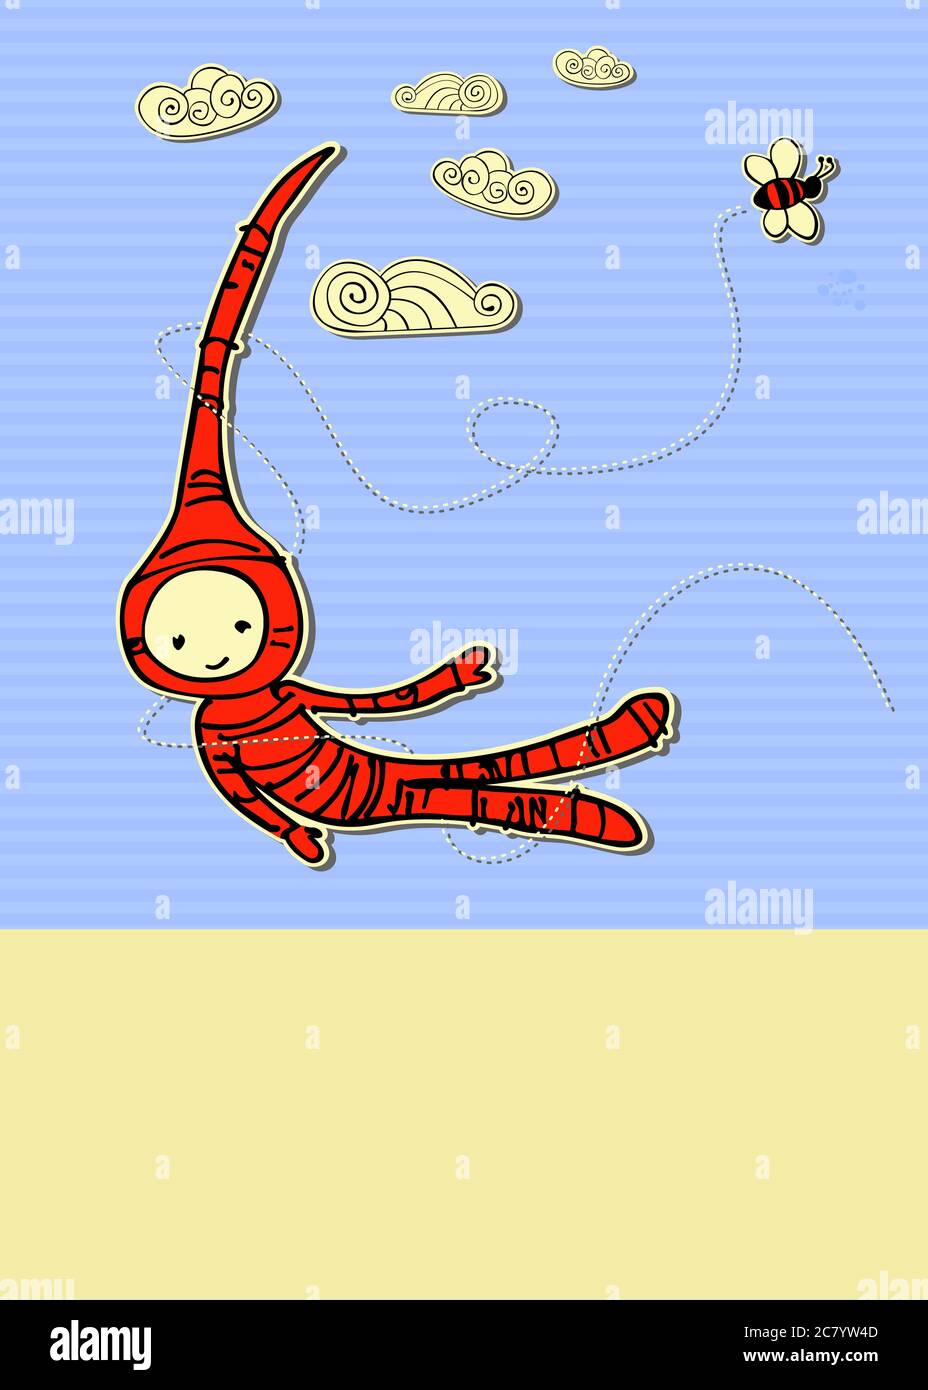 Cute birthday card for kids with a flying creature. Stock Photo